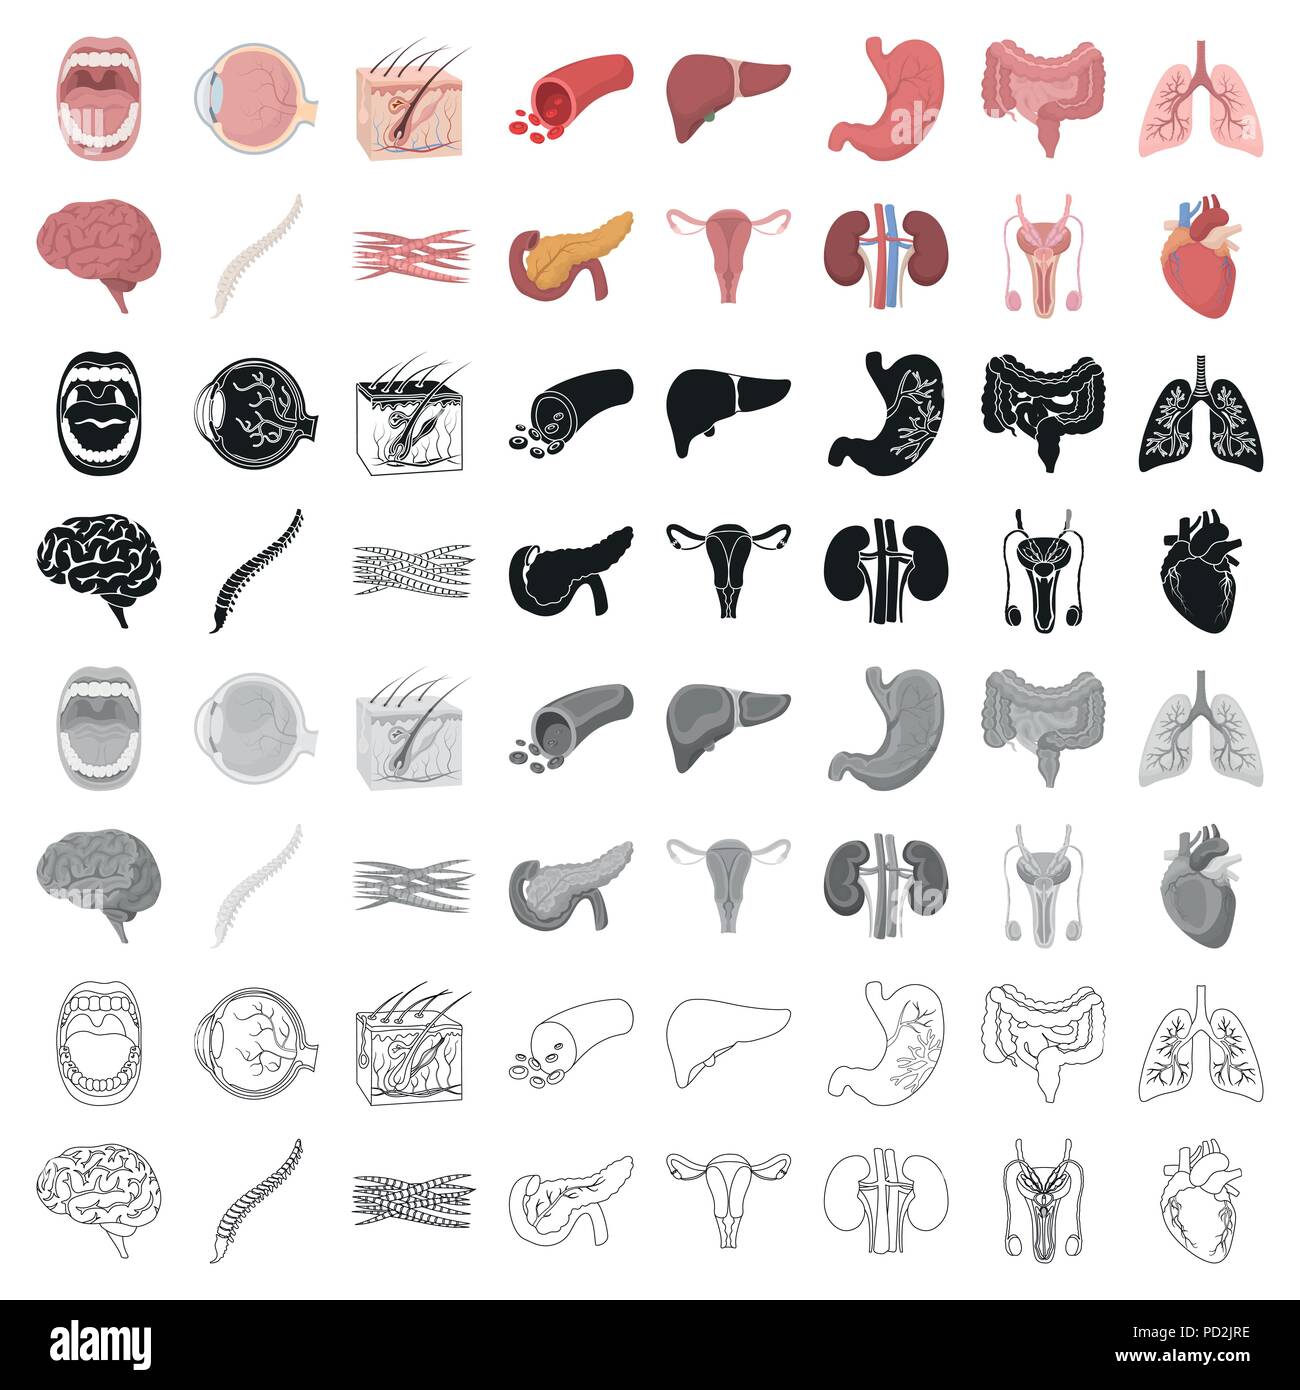 art,boold,brain,cartoon,collection,design,eyeball,gastrointestinal,gray,heart,icon,illustration,isolated,kidney,liver,logo,lungs,male,mouth,muscle,organs,pancreas,reproductive,set,skin,spine,stomach,symbol,system,tract,uterus,vector,vessel,web, Vector Vectors , Stock Vector